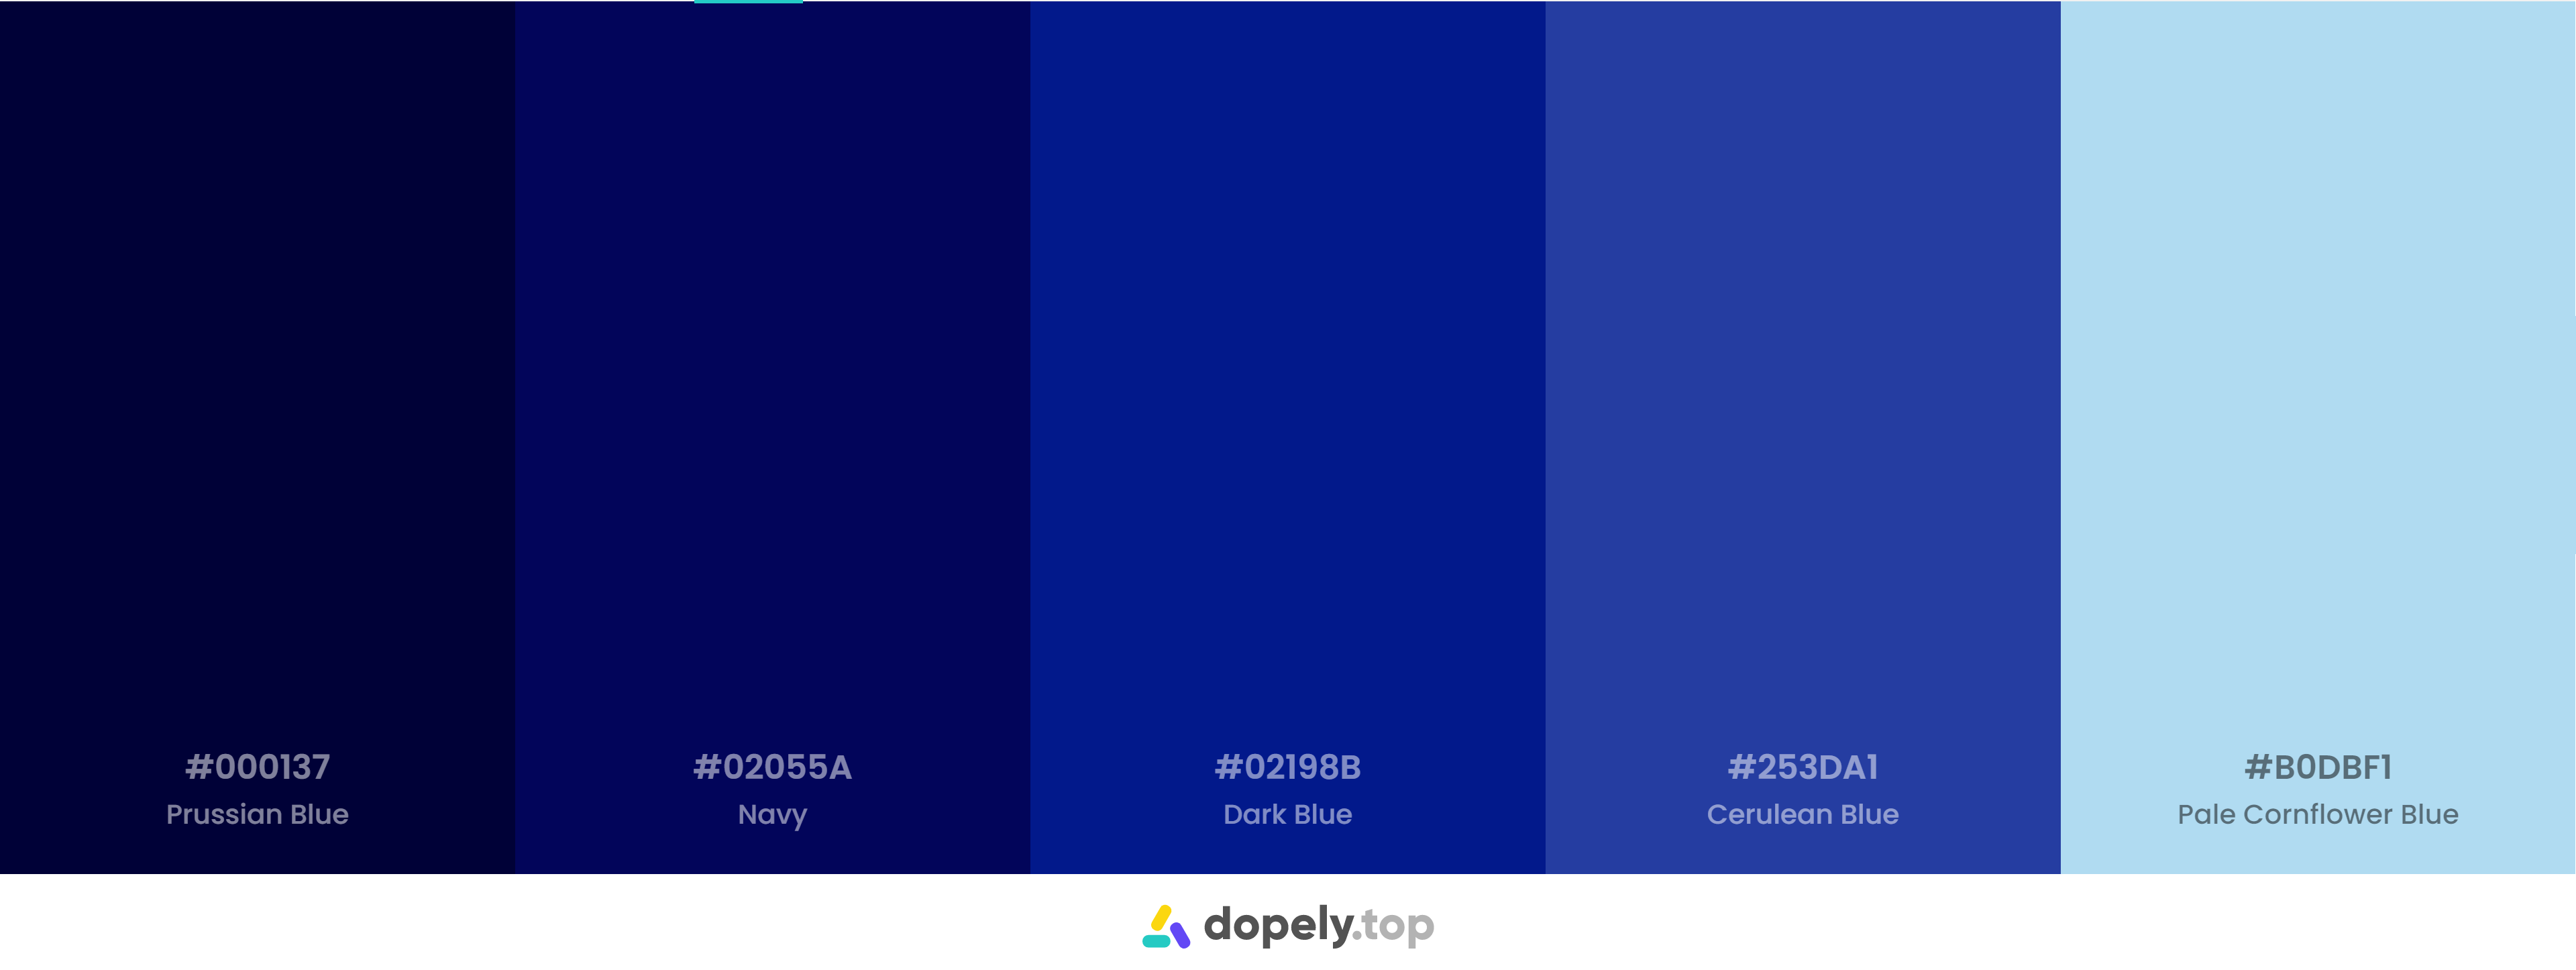 https://colors.dopely.top/inside-colors/wp-content/uploads/2021/03/Dopely-Blue-Color-Palette-%E2%80%93-12.png